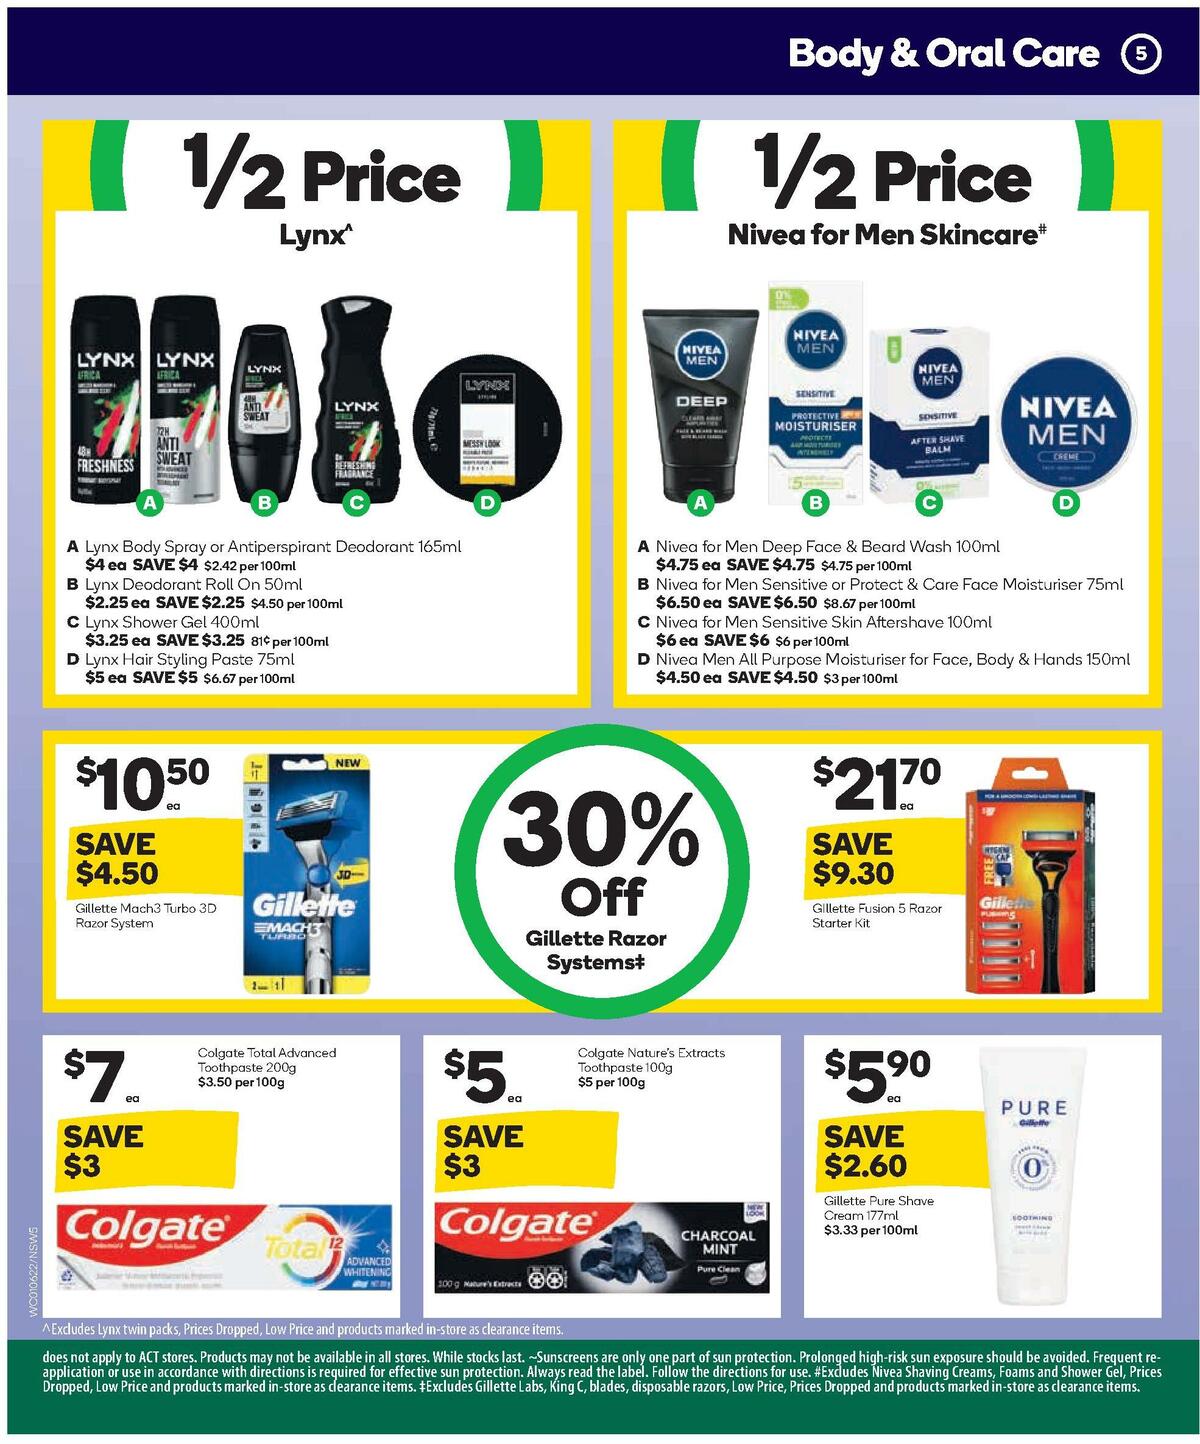 Woolworths Health & Beauty Catalogues from 1 June